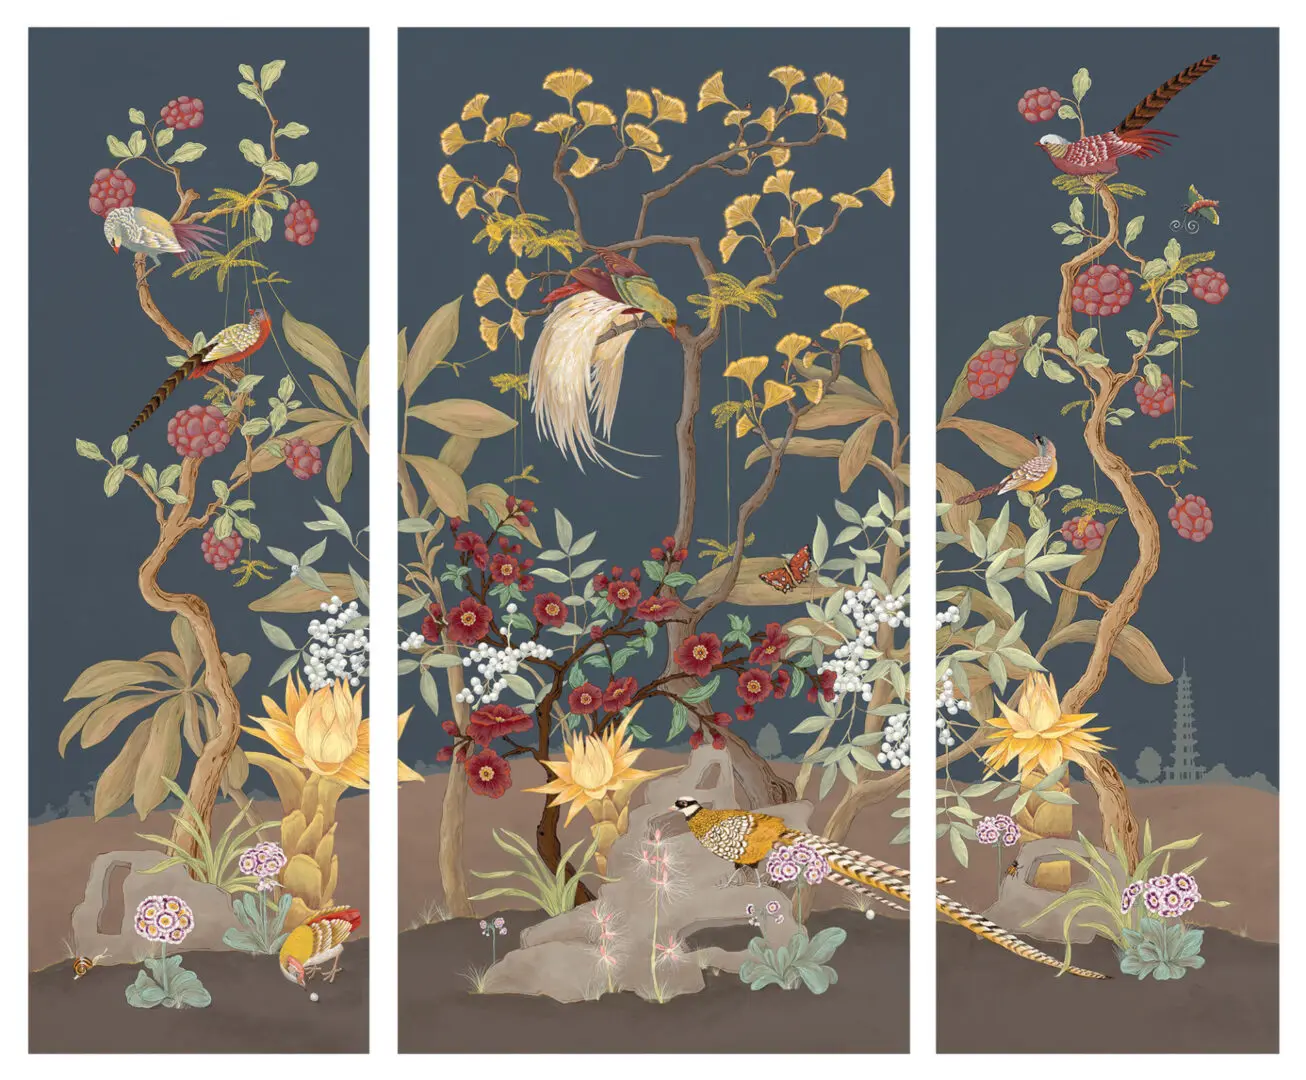 A set of three "Pheasants and Forest" chinoiserie panels featuring pheasants and birds, with a particular focus on pheasants.